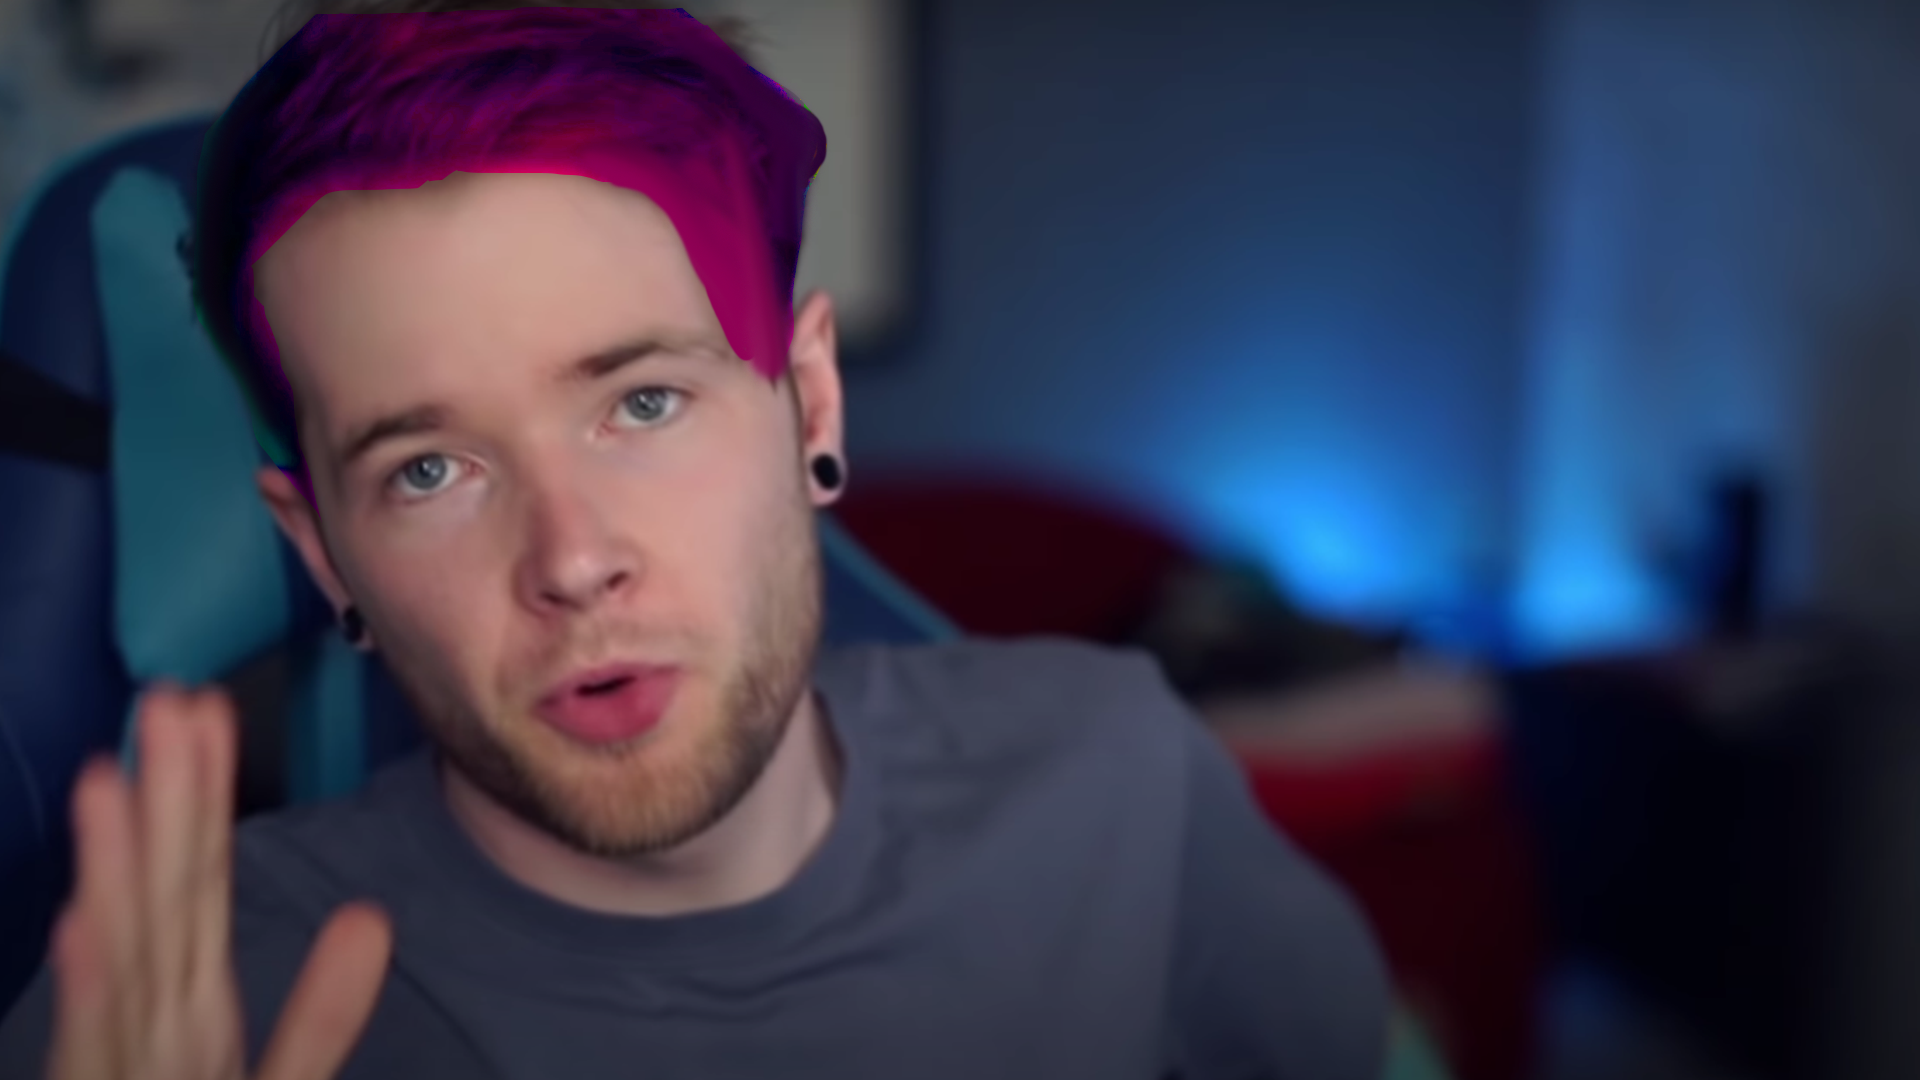 2. How to Get Dantdm's Blue and Pink Hair - wide 4